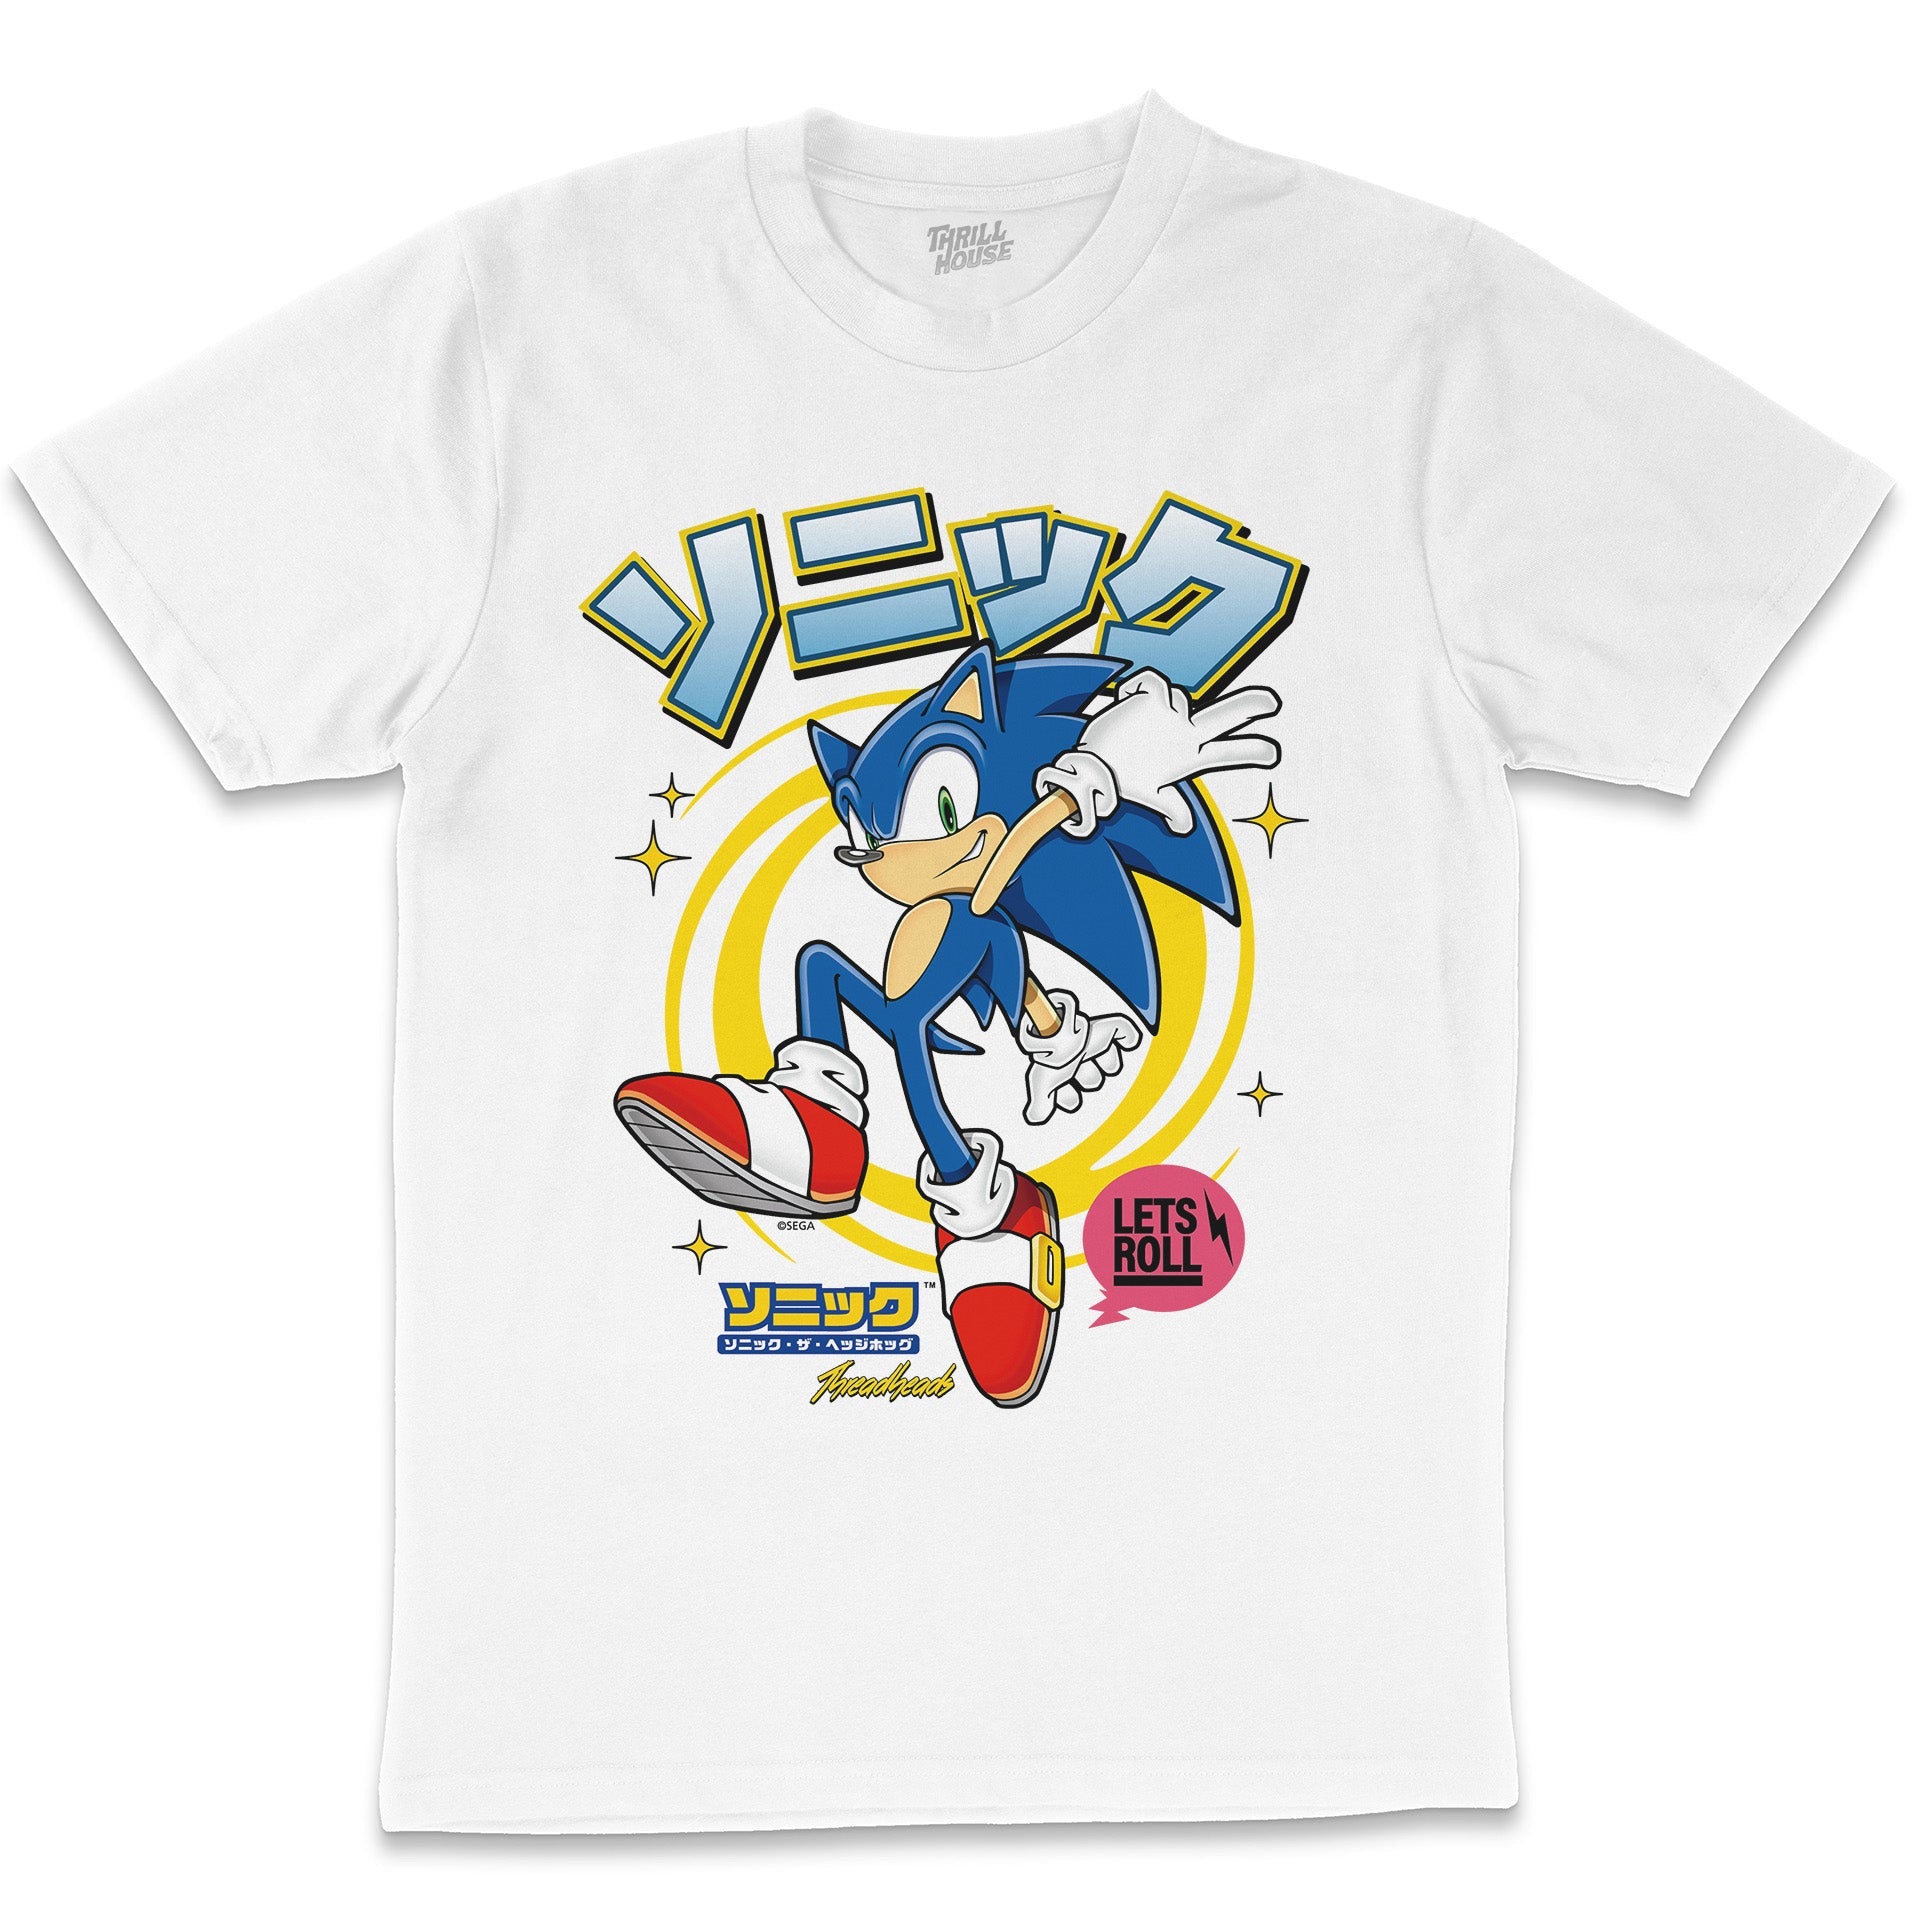 Sonic The Hedgehog Japanese Title Retro 90s Video Game Cartridge Console Officially Licensed SEGA T-Shirt